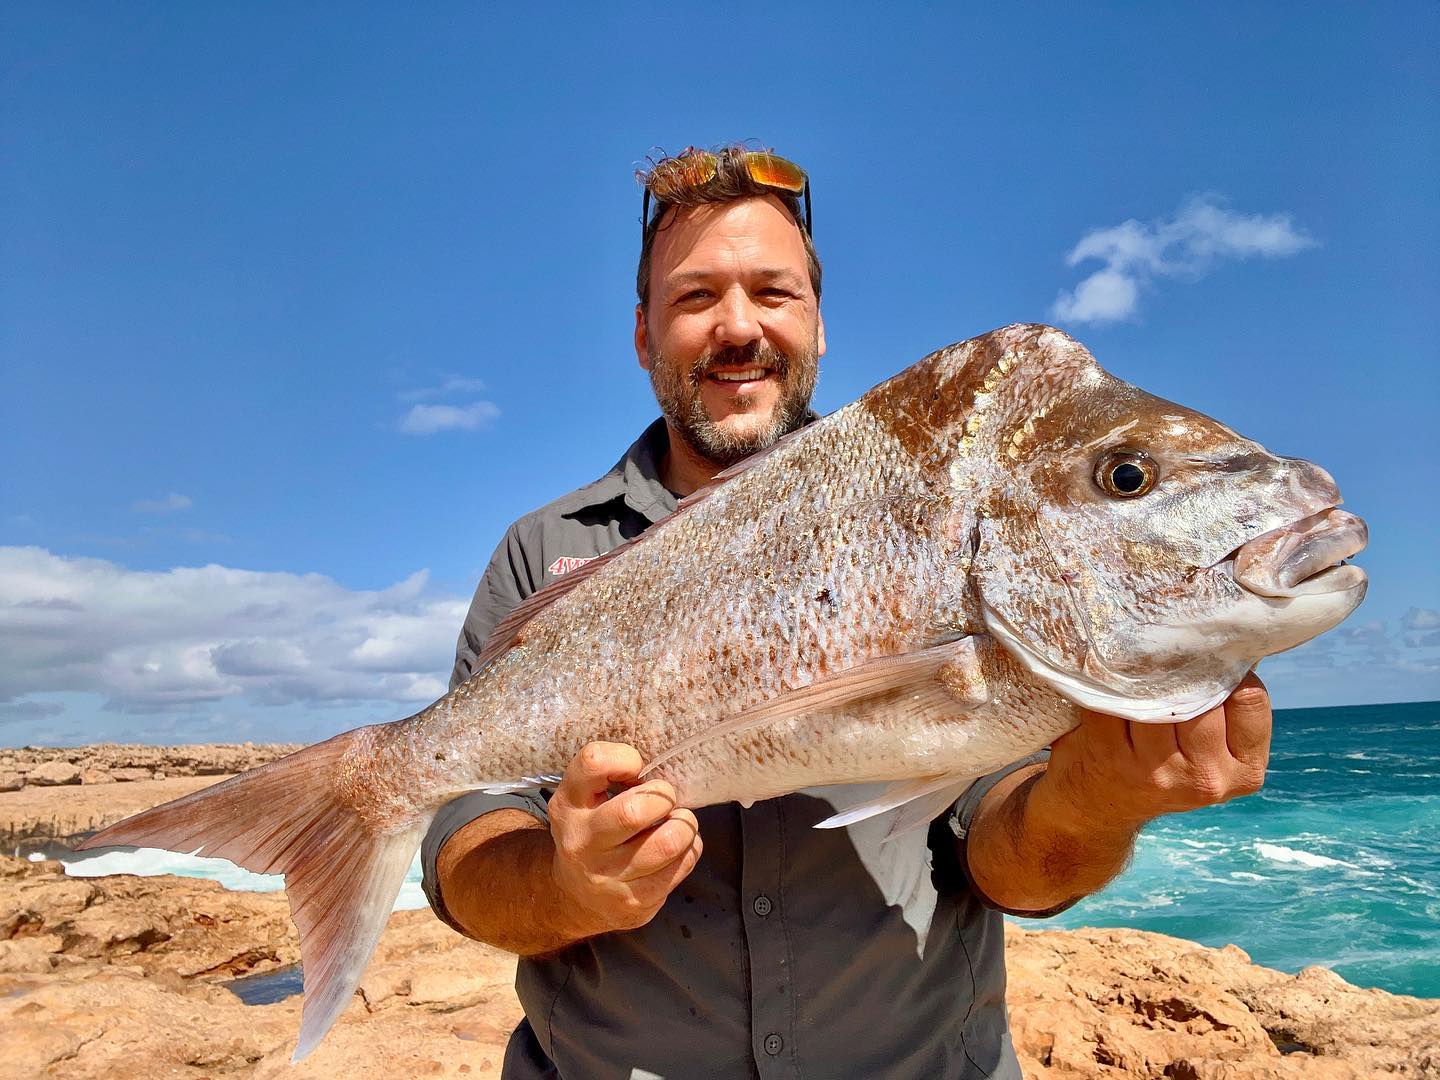 Nailed it: 77 pinky off the cliffs at @dirkhartogisland 
#desertvisions 

@pennfishing_anz @kickassproducts